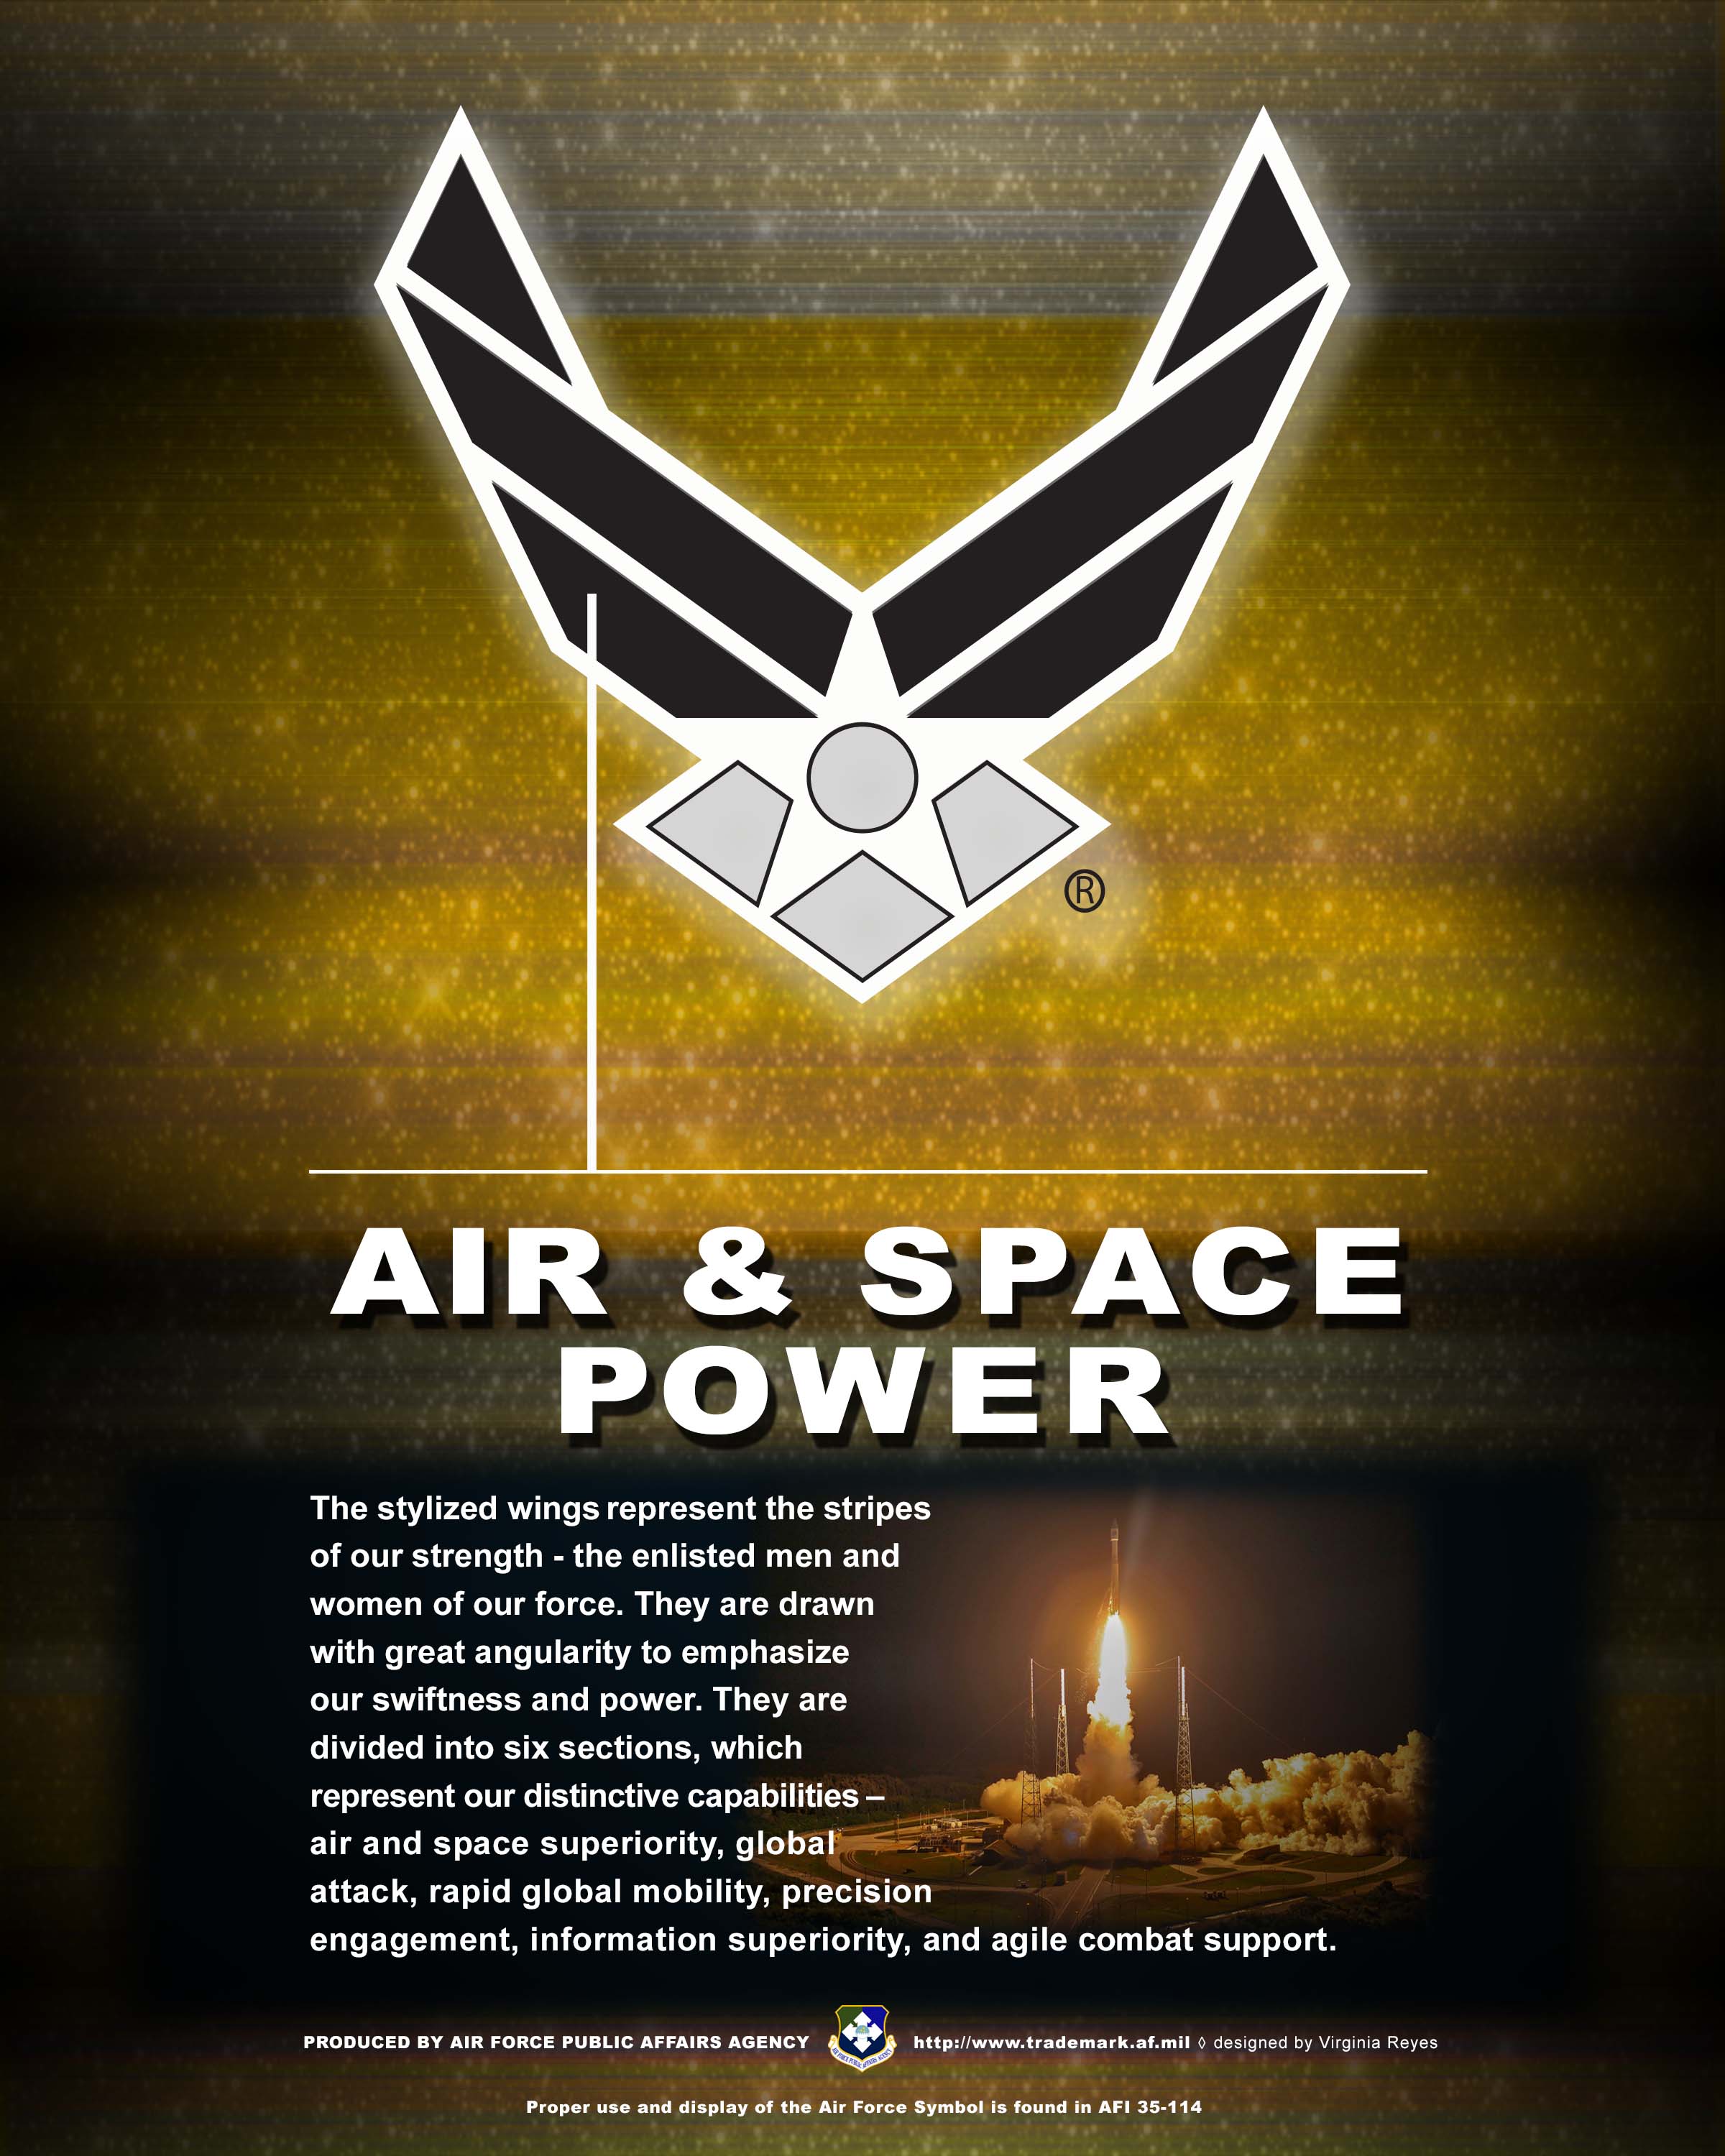 AF Branding & Trademark Licensing > About Us > The Air Force Symbol2400 x 3000